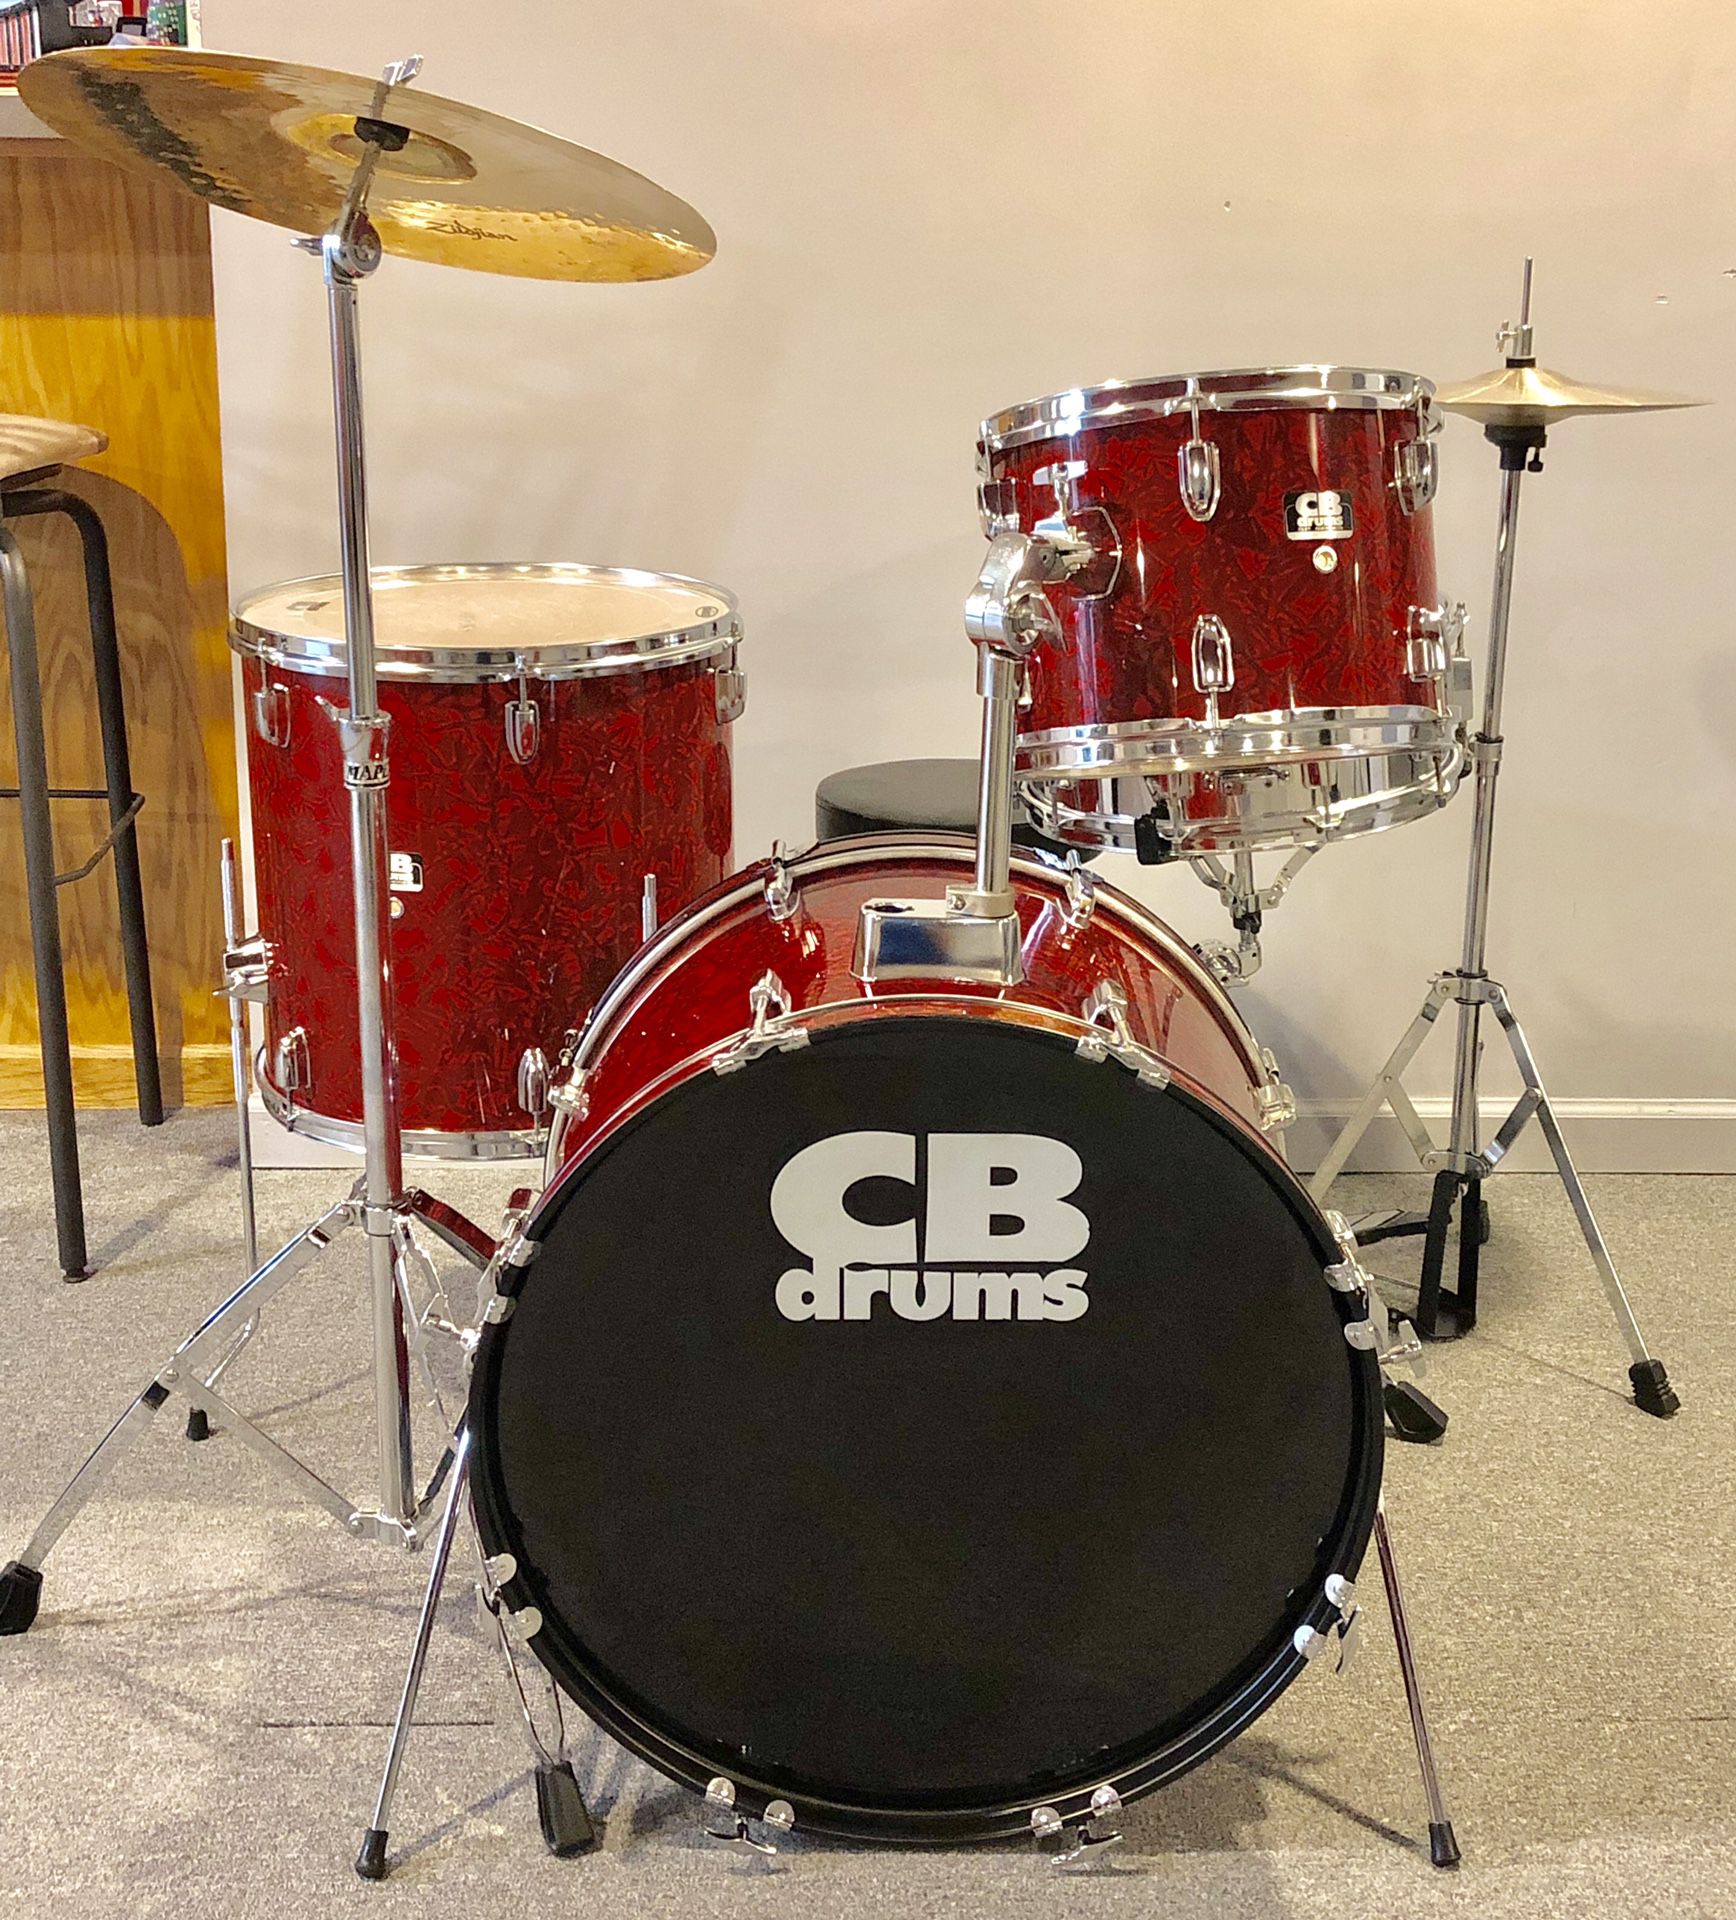 Drum Set, CB SP Series, 4 piece; Snare, Tom, Bass, Floor Tom, Cymbals, Stands, Pedal, Throne, etc.